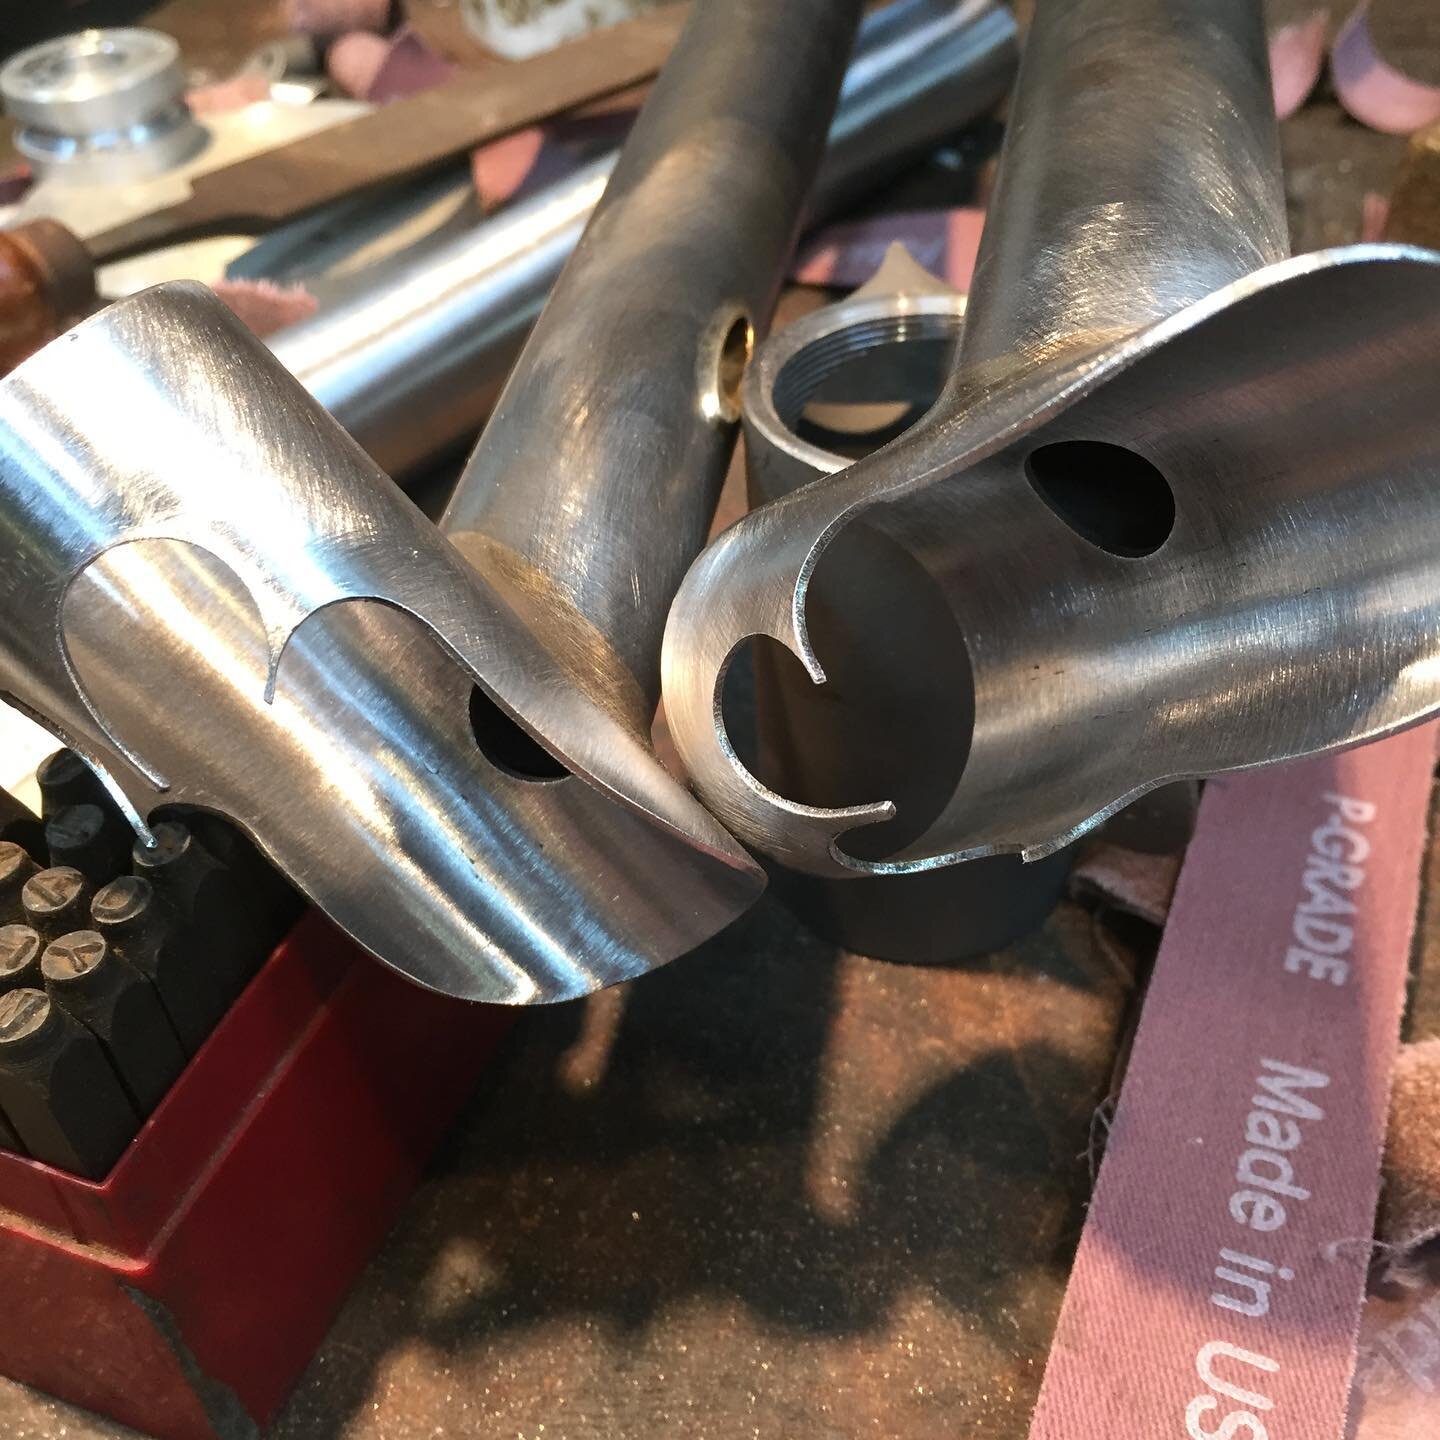 Bi lam lug joints. These take time. Hand carved then fillet brazed. They will be joined to the rest of the other tubes with silver. Look close at the date stamped in the bb. It will be a collectors item some day. Made at a time when the world changed